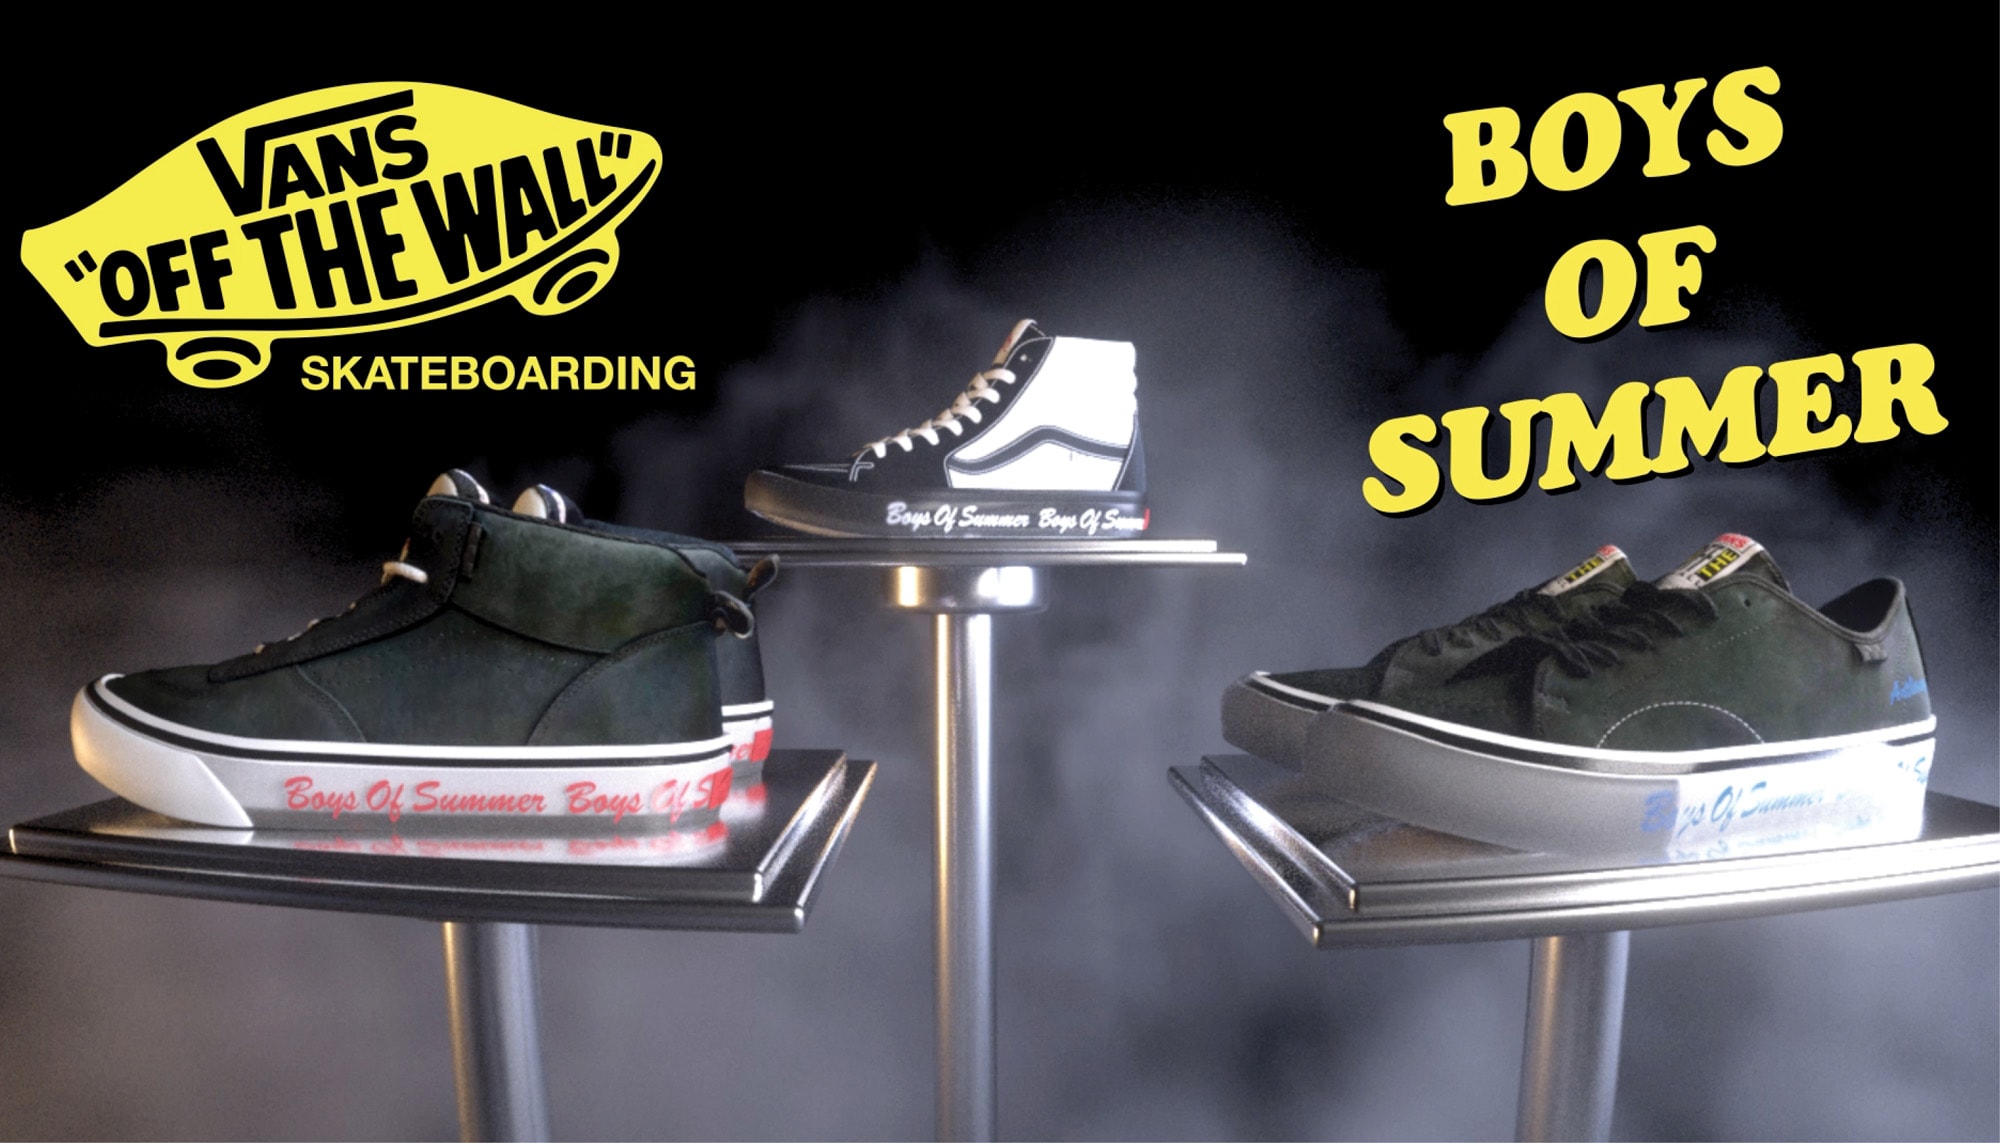 Vans x Boys of Summer Collection